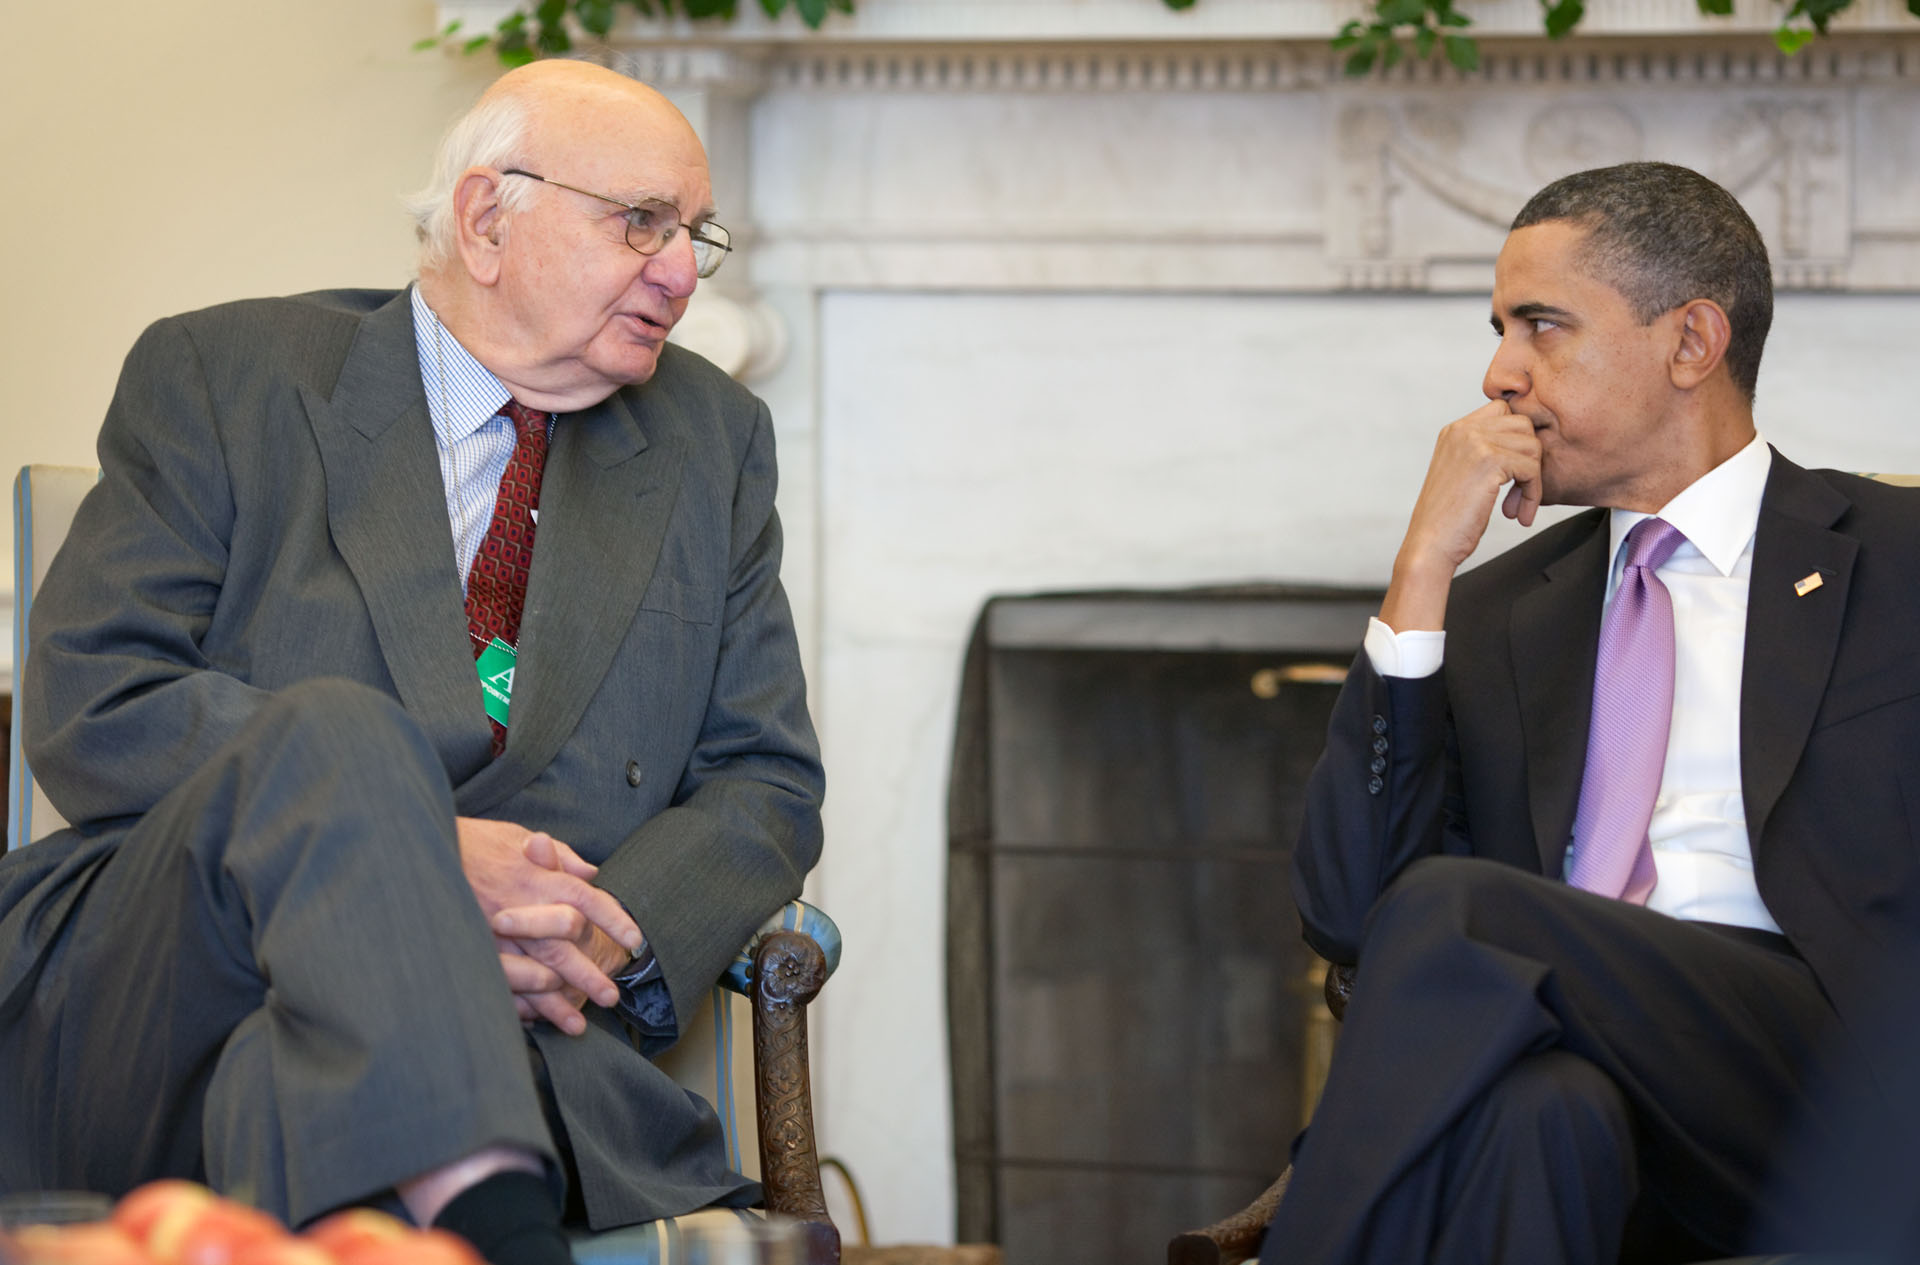 The President Meets with Paul Volcker Before Announcing 